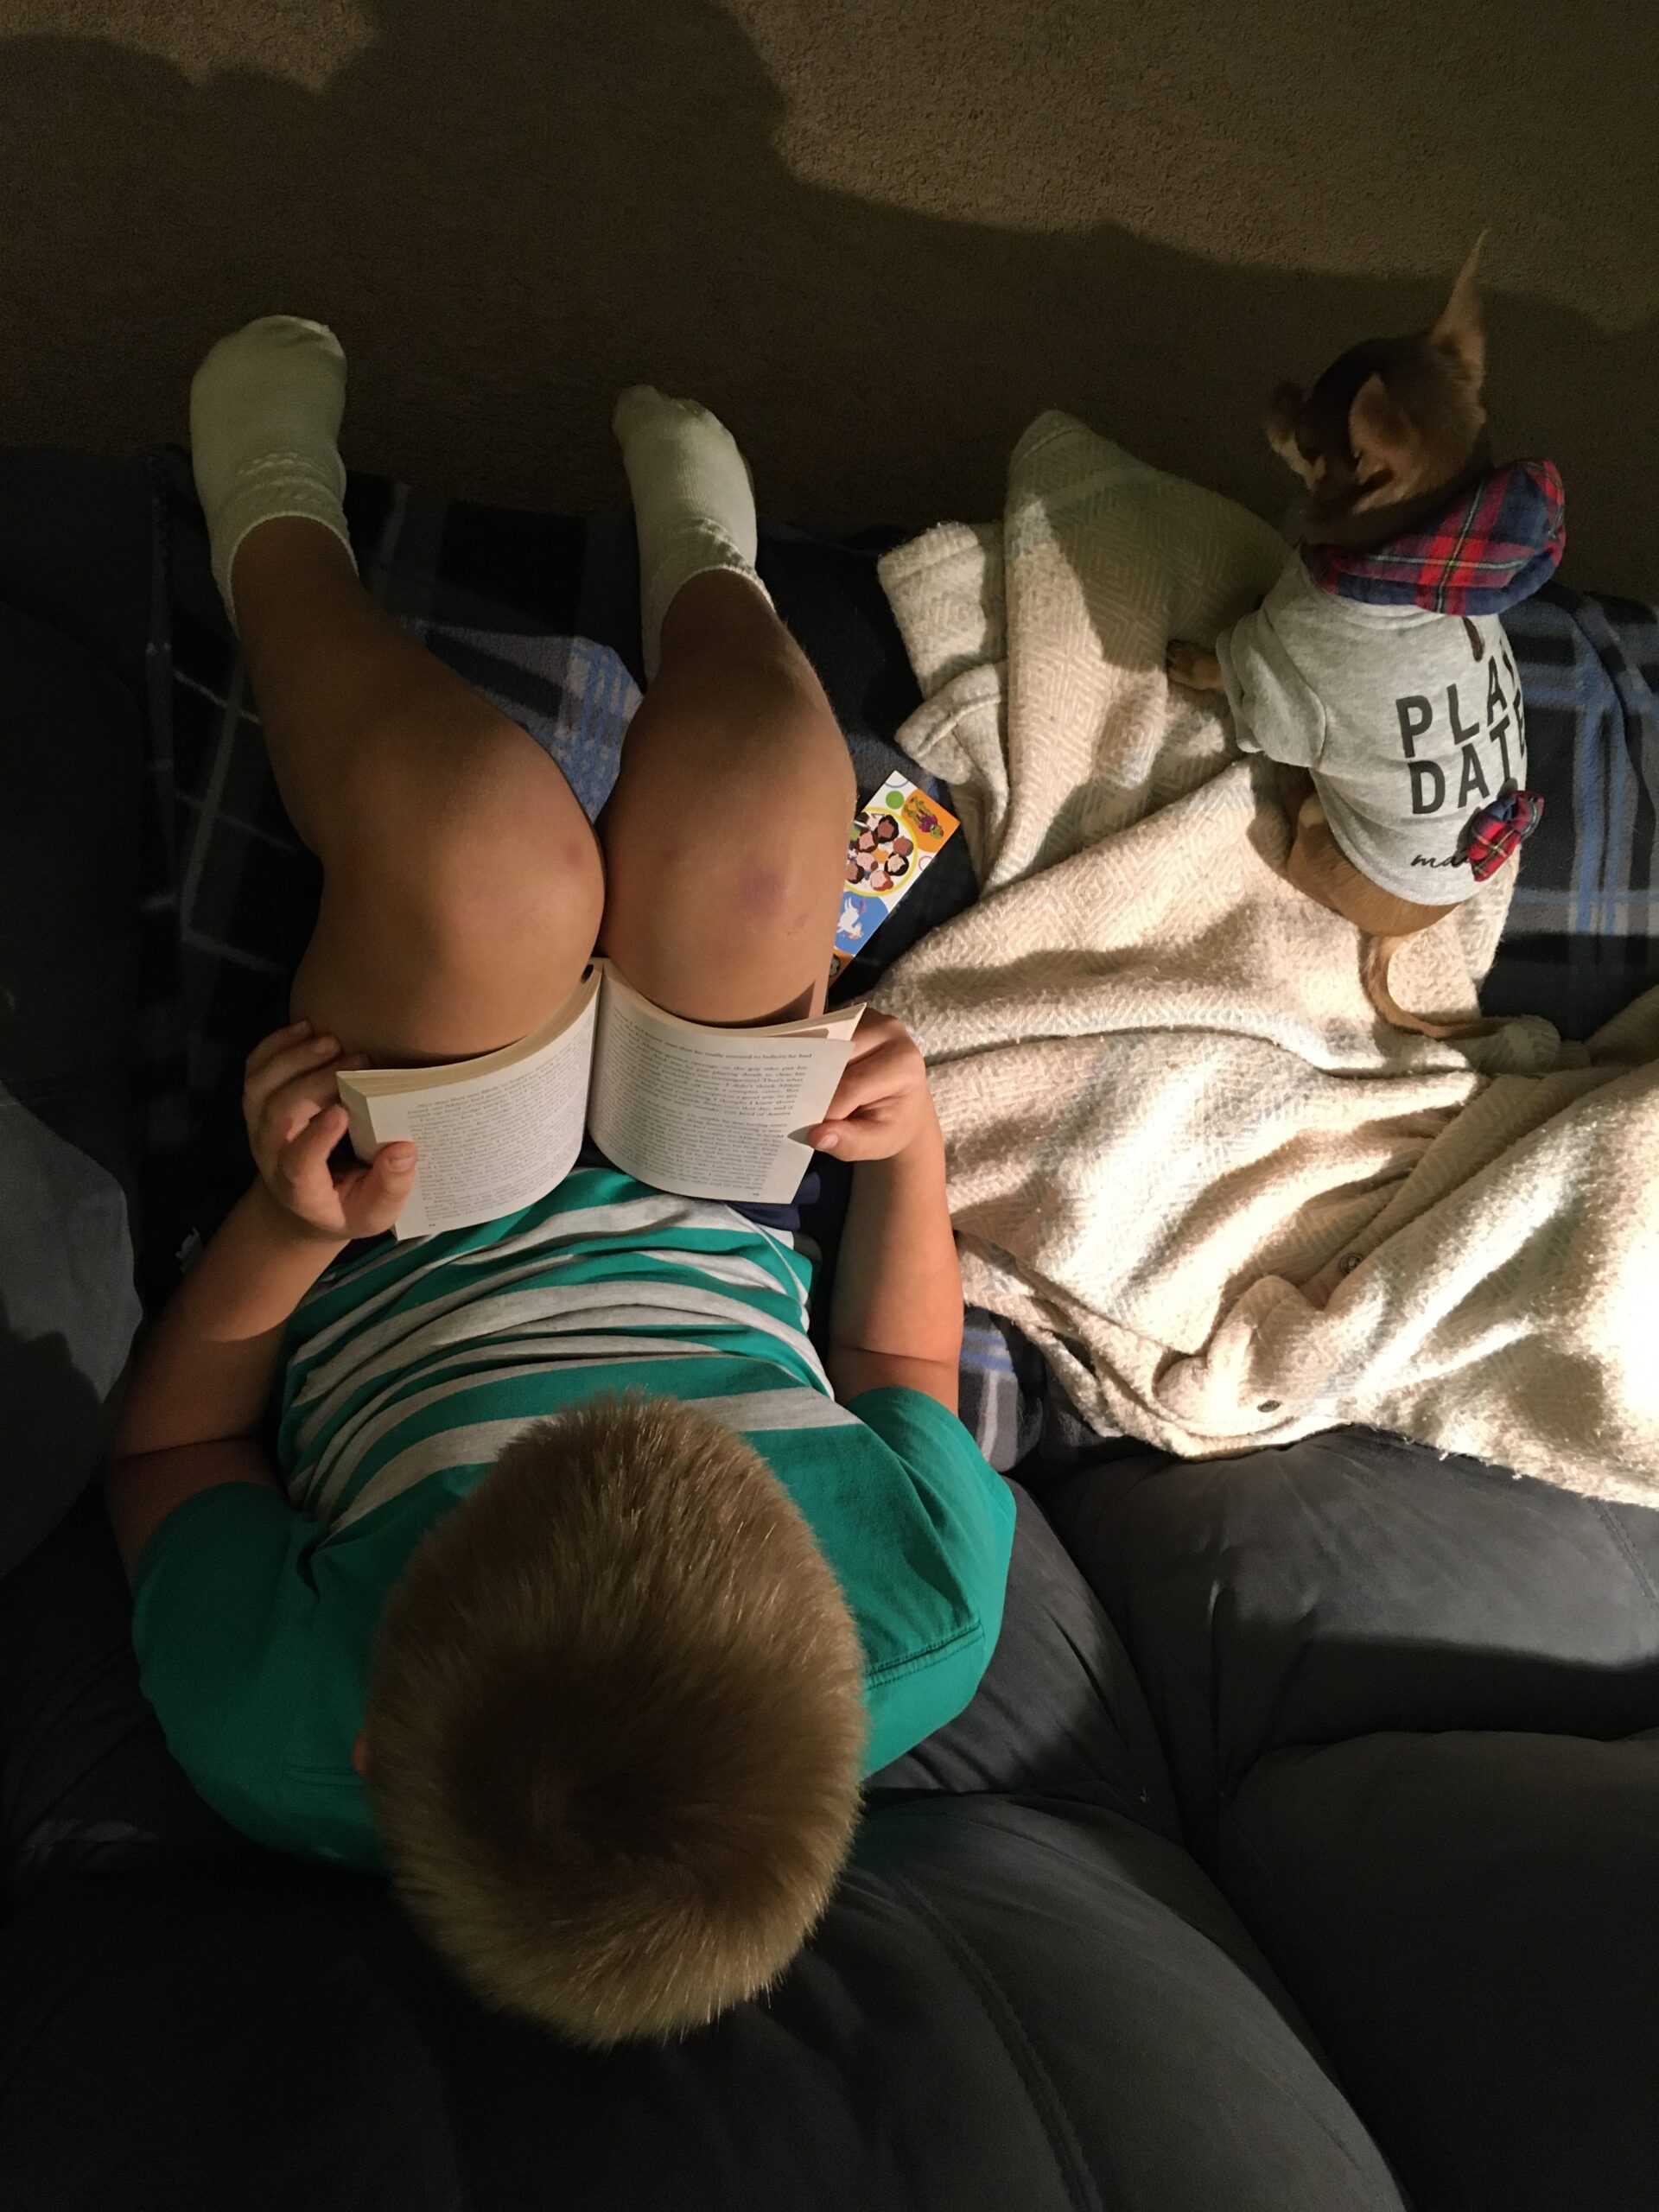 photo of a child reading a book on the couch, taken from directly overhead. Dog in a sweatshirt is sharing the couch